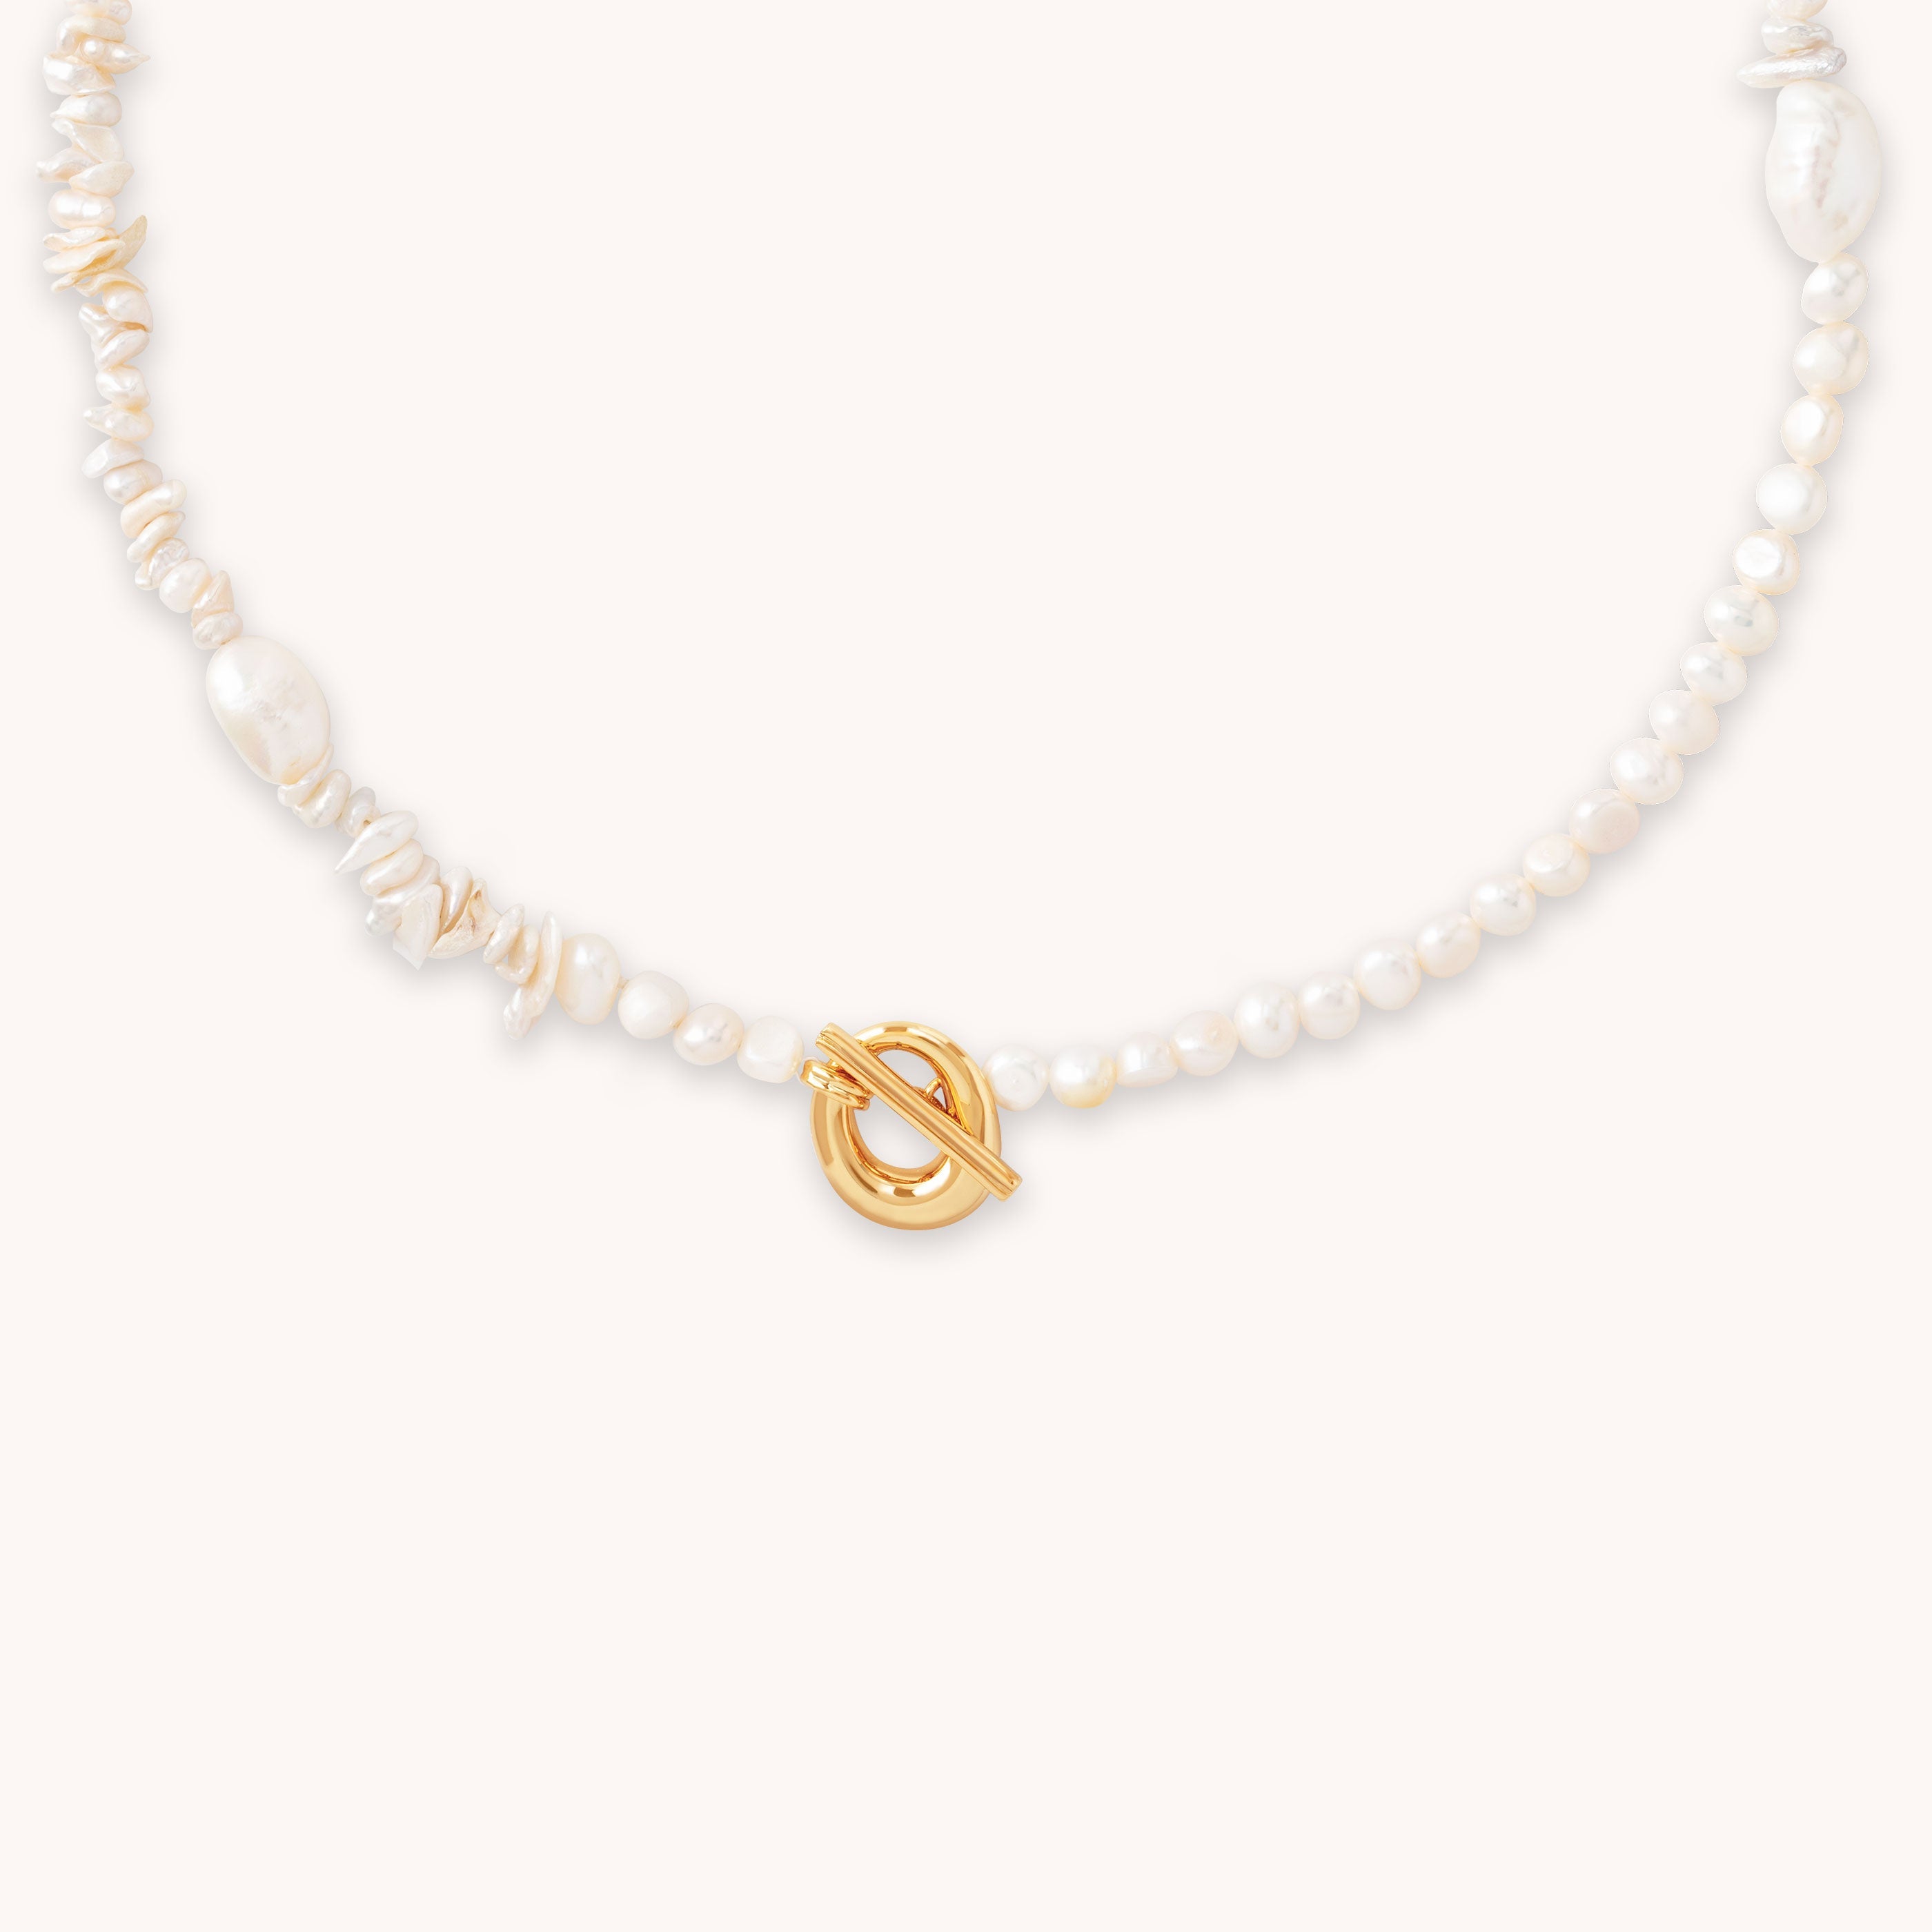 Pearl Beaded T-Bar Gold Necklace | Astrid & Miyu Necklaces